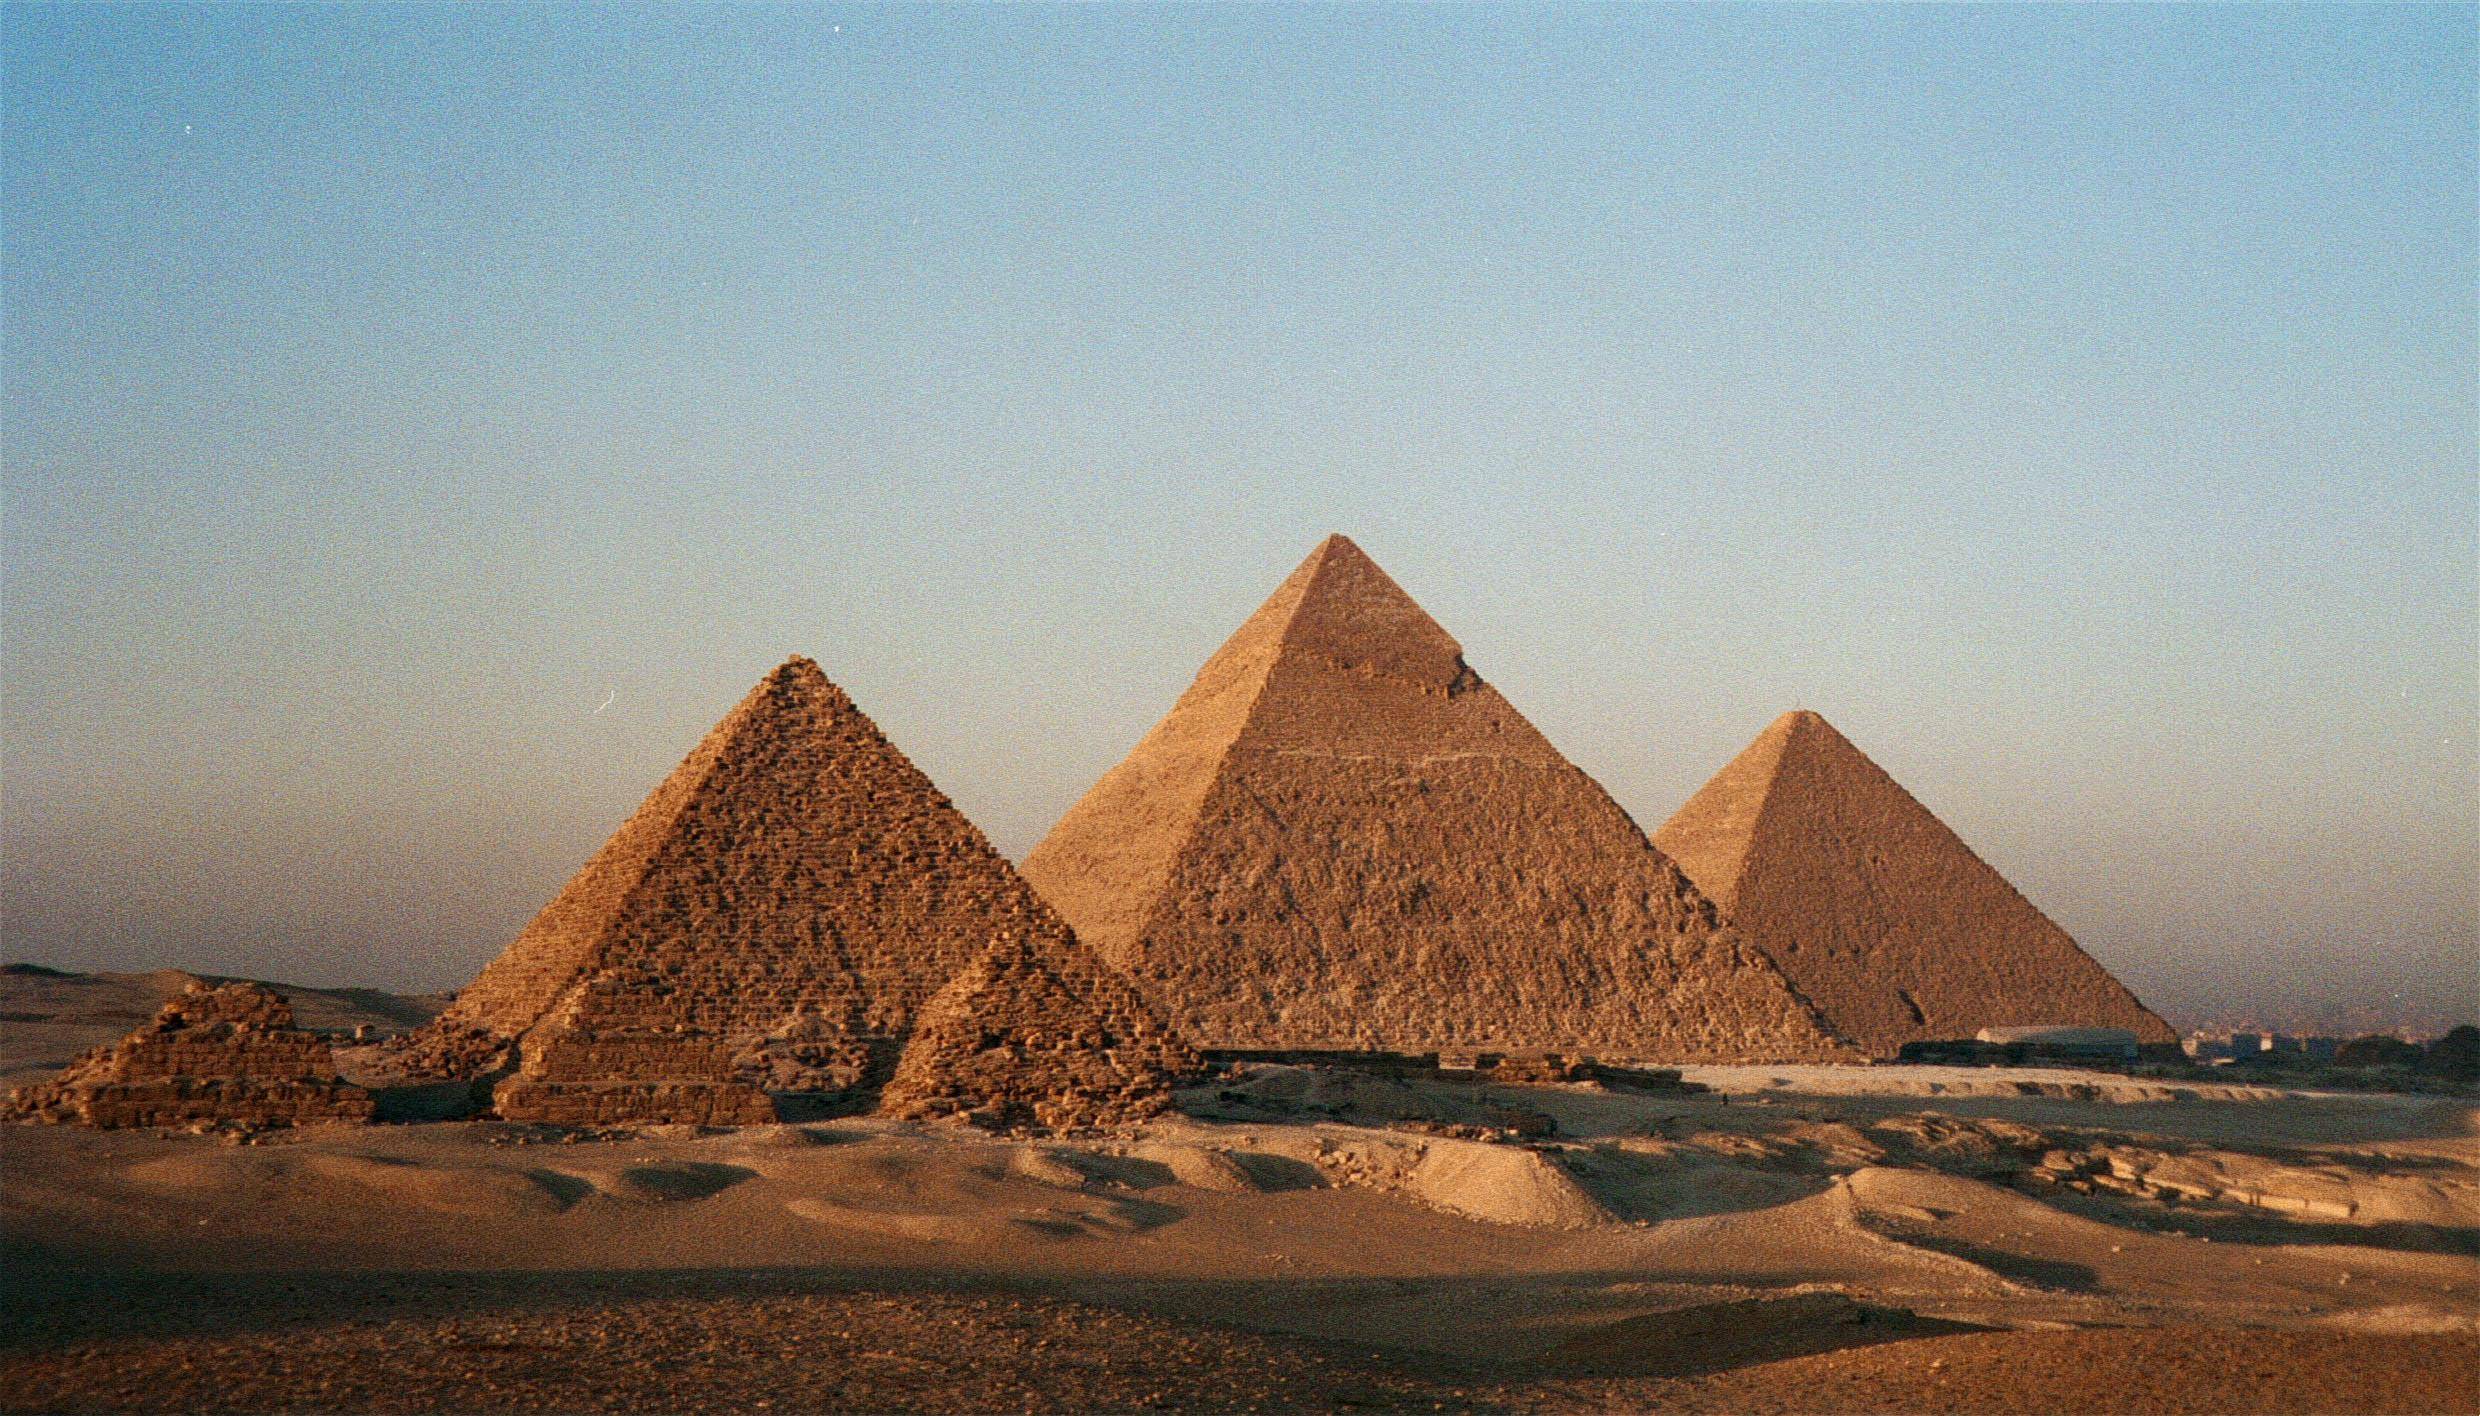 Pyramids Of Giza In Egypt Holidays Wallpaper